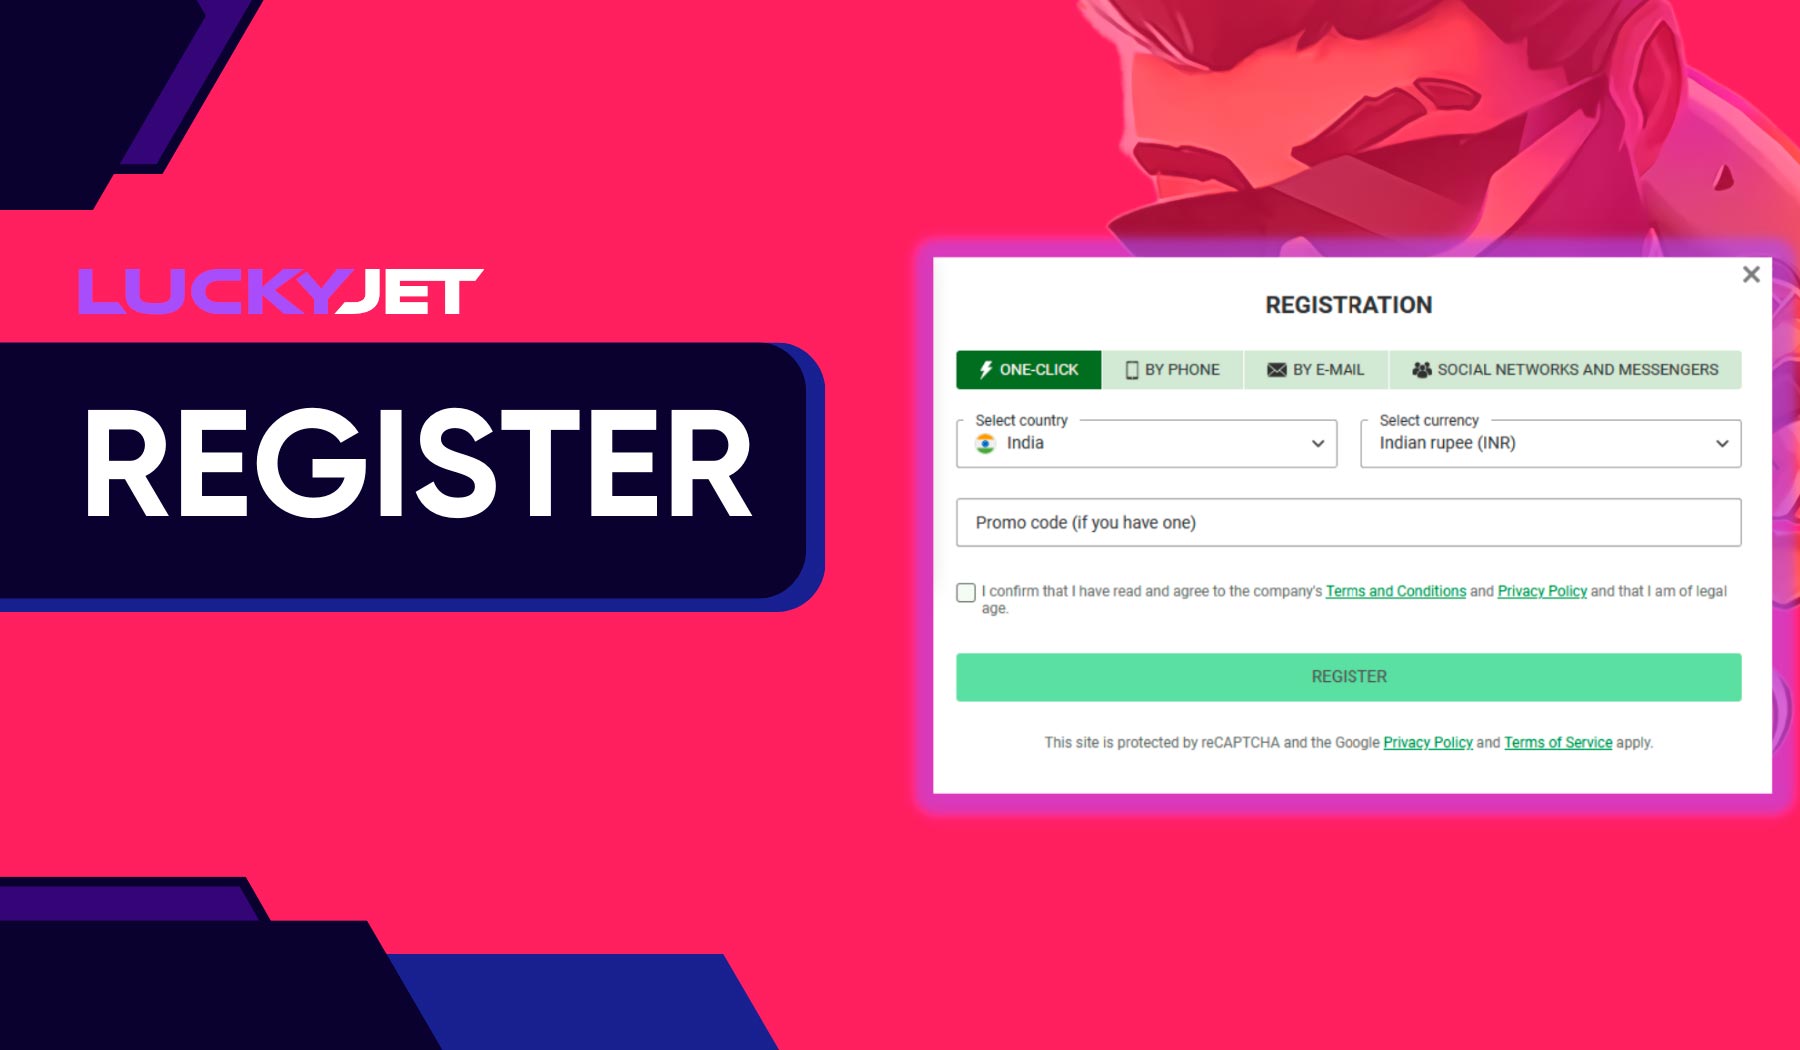 To play Lucky Jet, you need to complete a quick registration on the Linebet platform